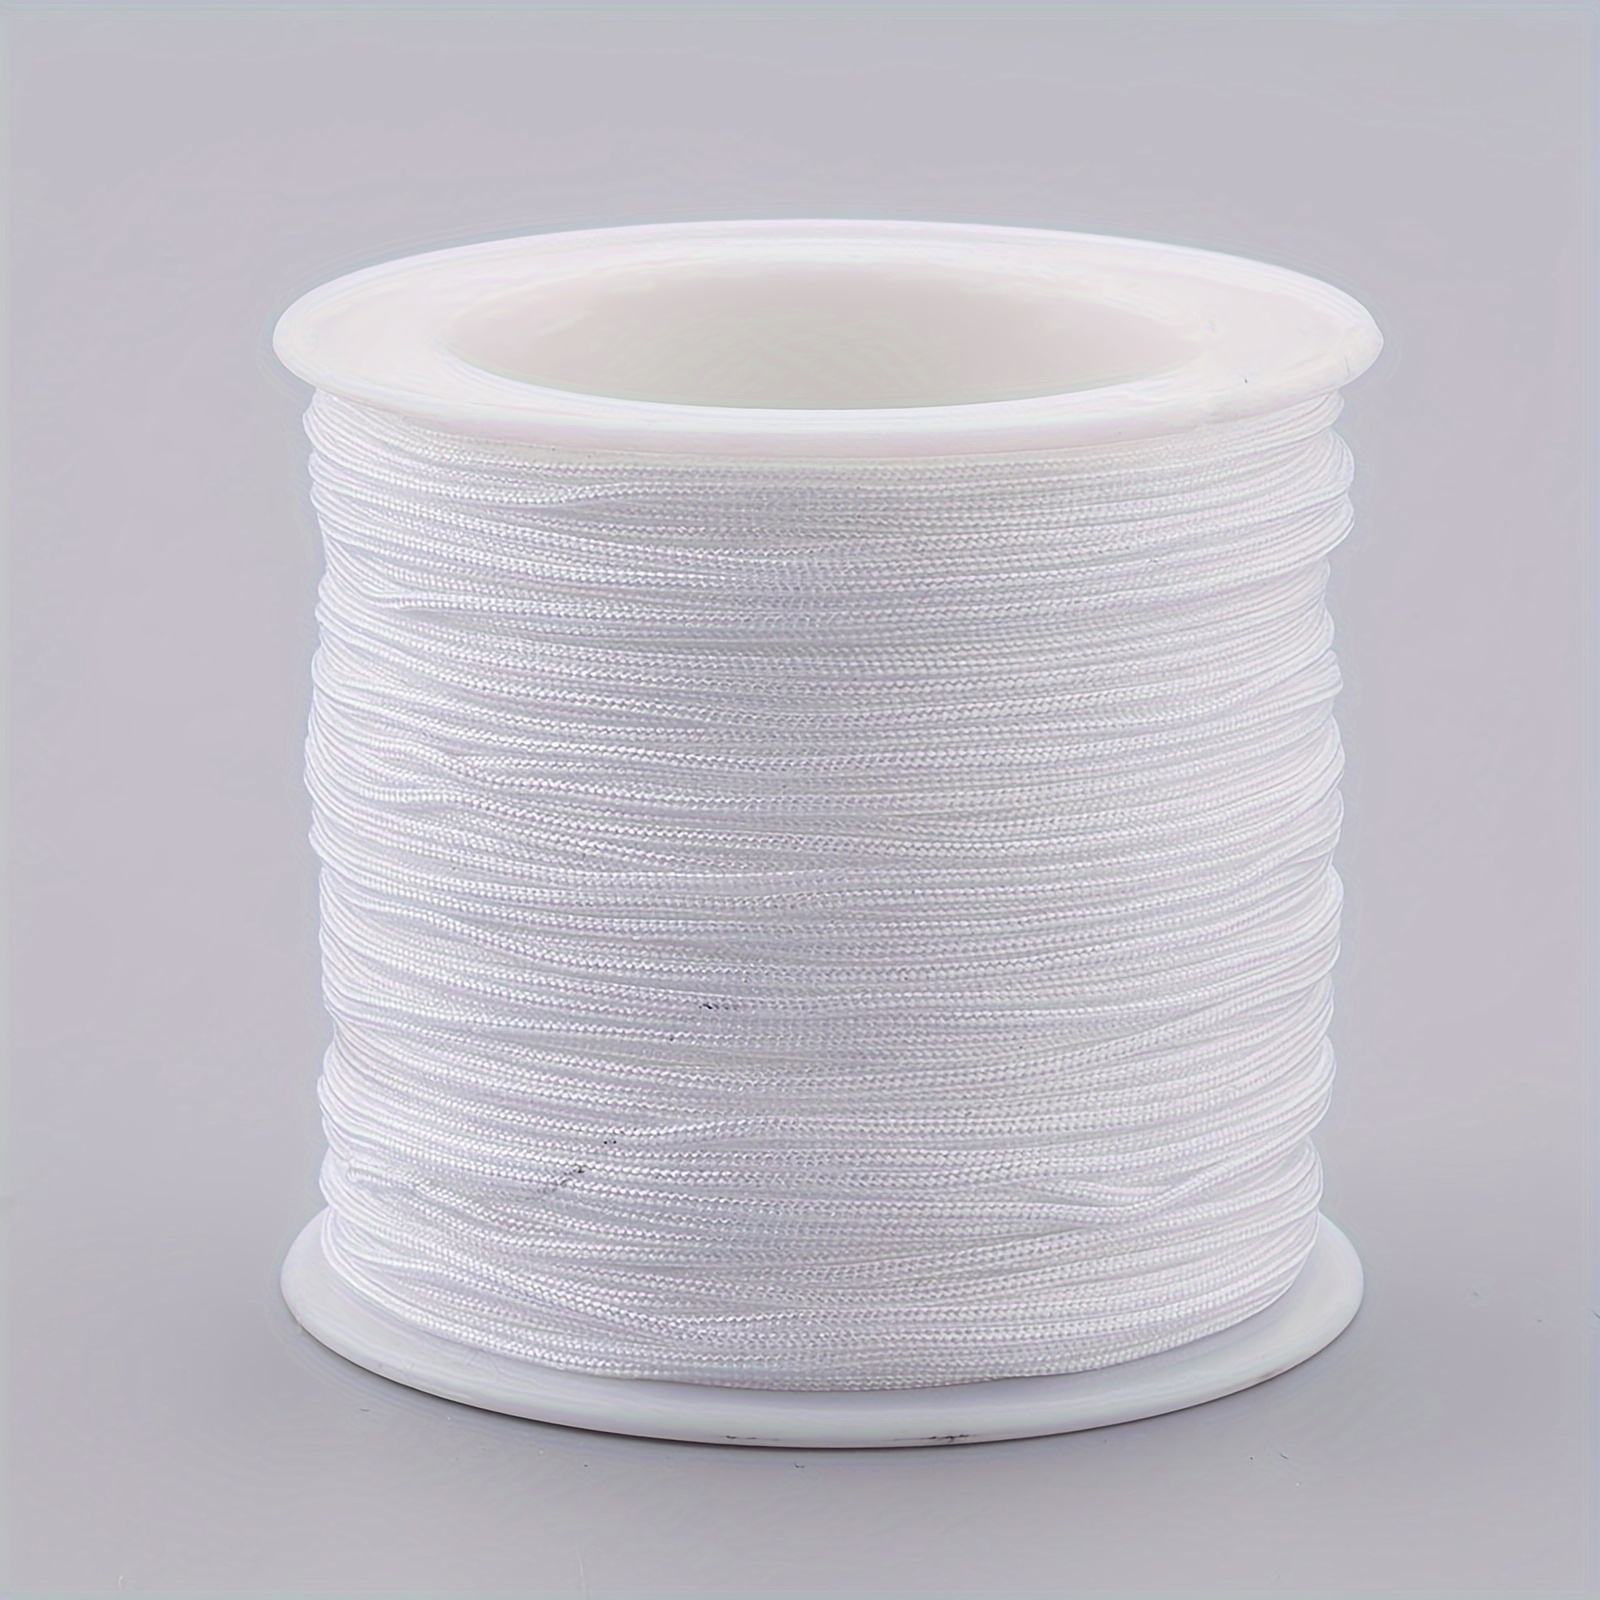 1roll 0.6mm DIY Nylon String For Bracelets,Beading, Necklaces, Macrame  Craft, Wind Chime, Jewelry Making